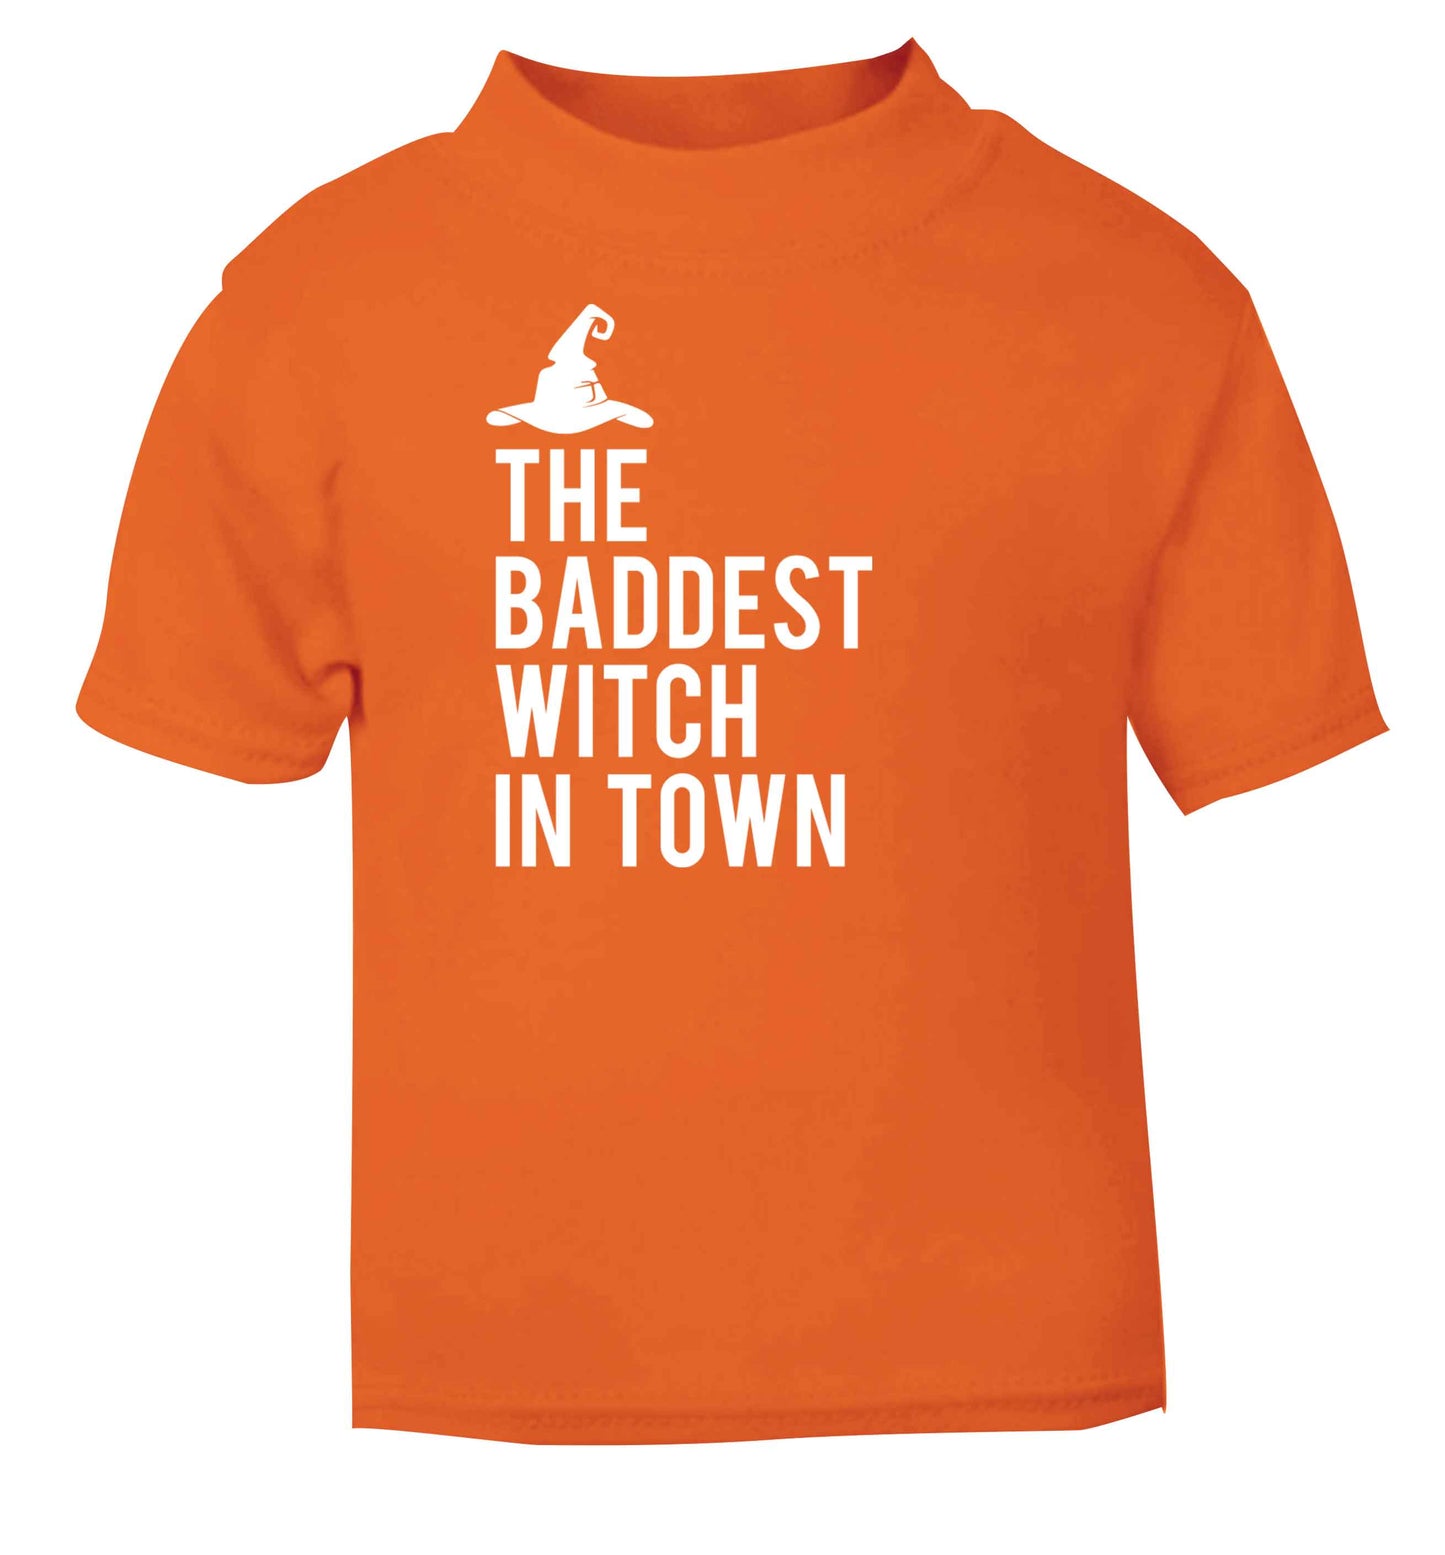 Badest witch in town orange baby toddler Tshirt 2 Years